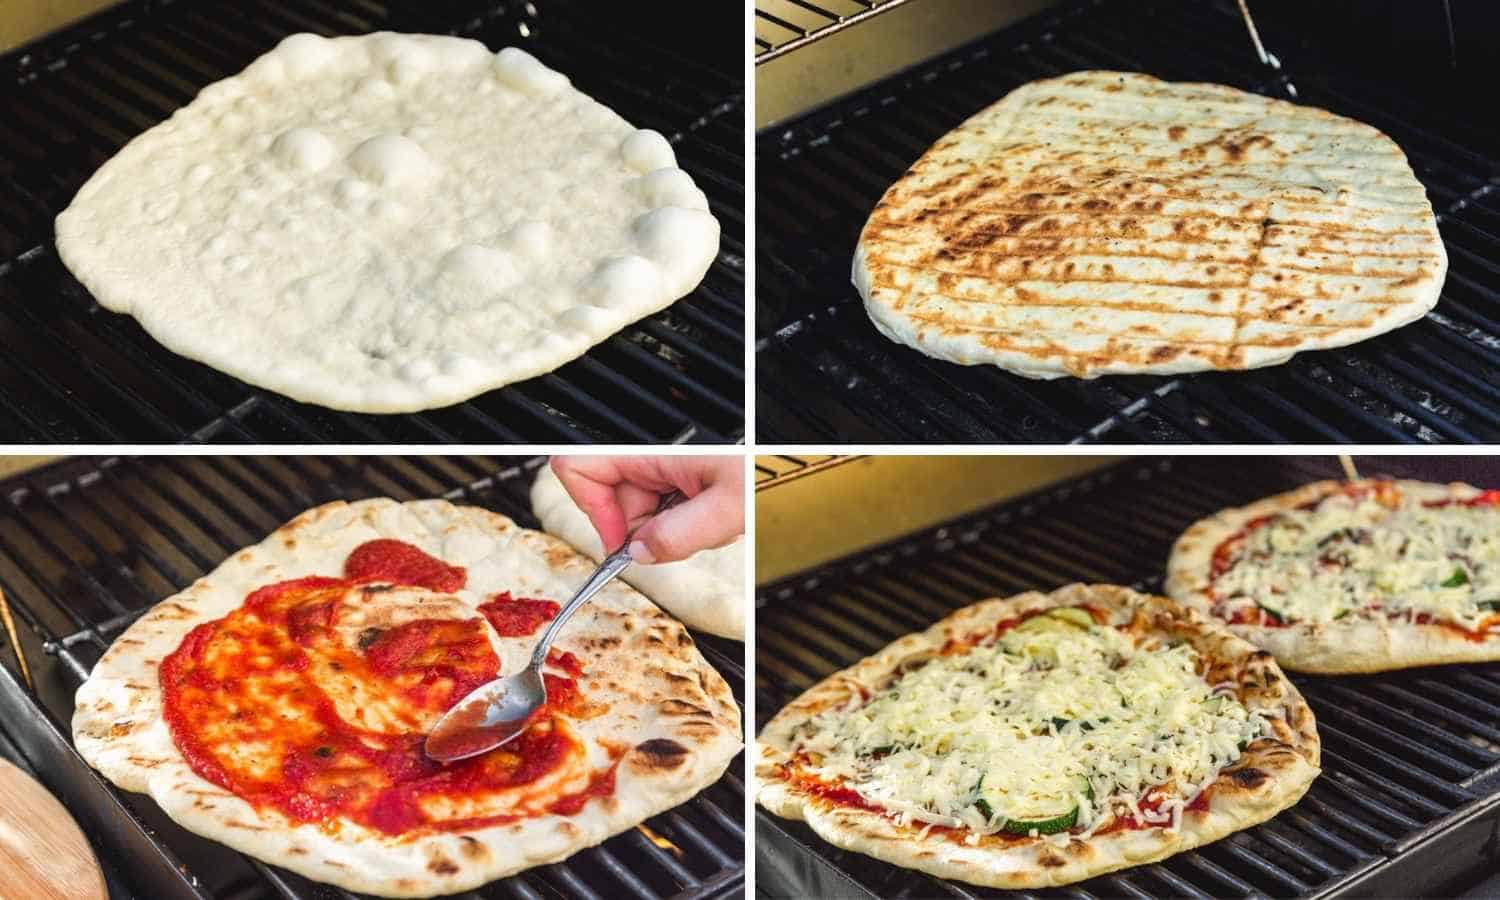 Collage of four images showing how to grill pizza and add pizza sauce and toppings before serving